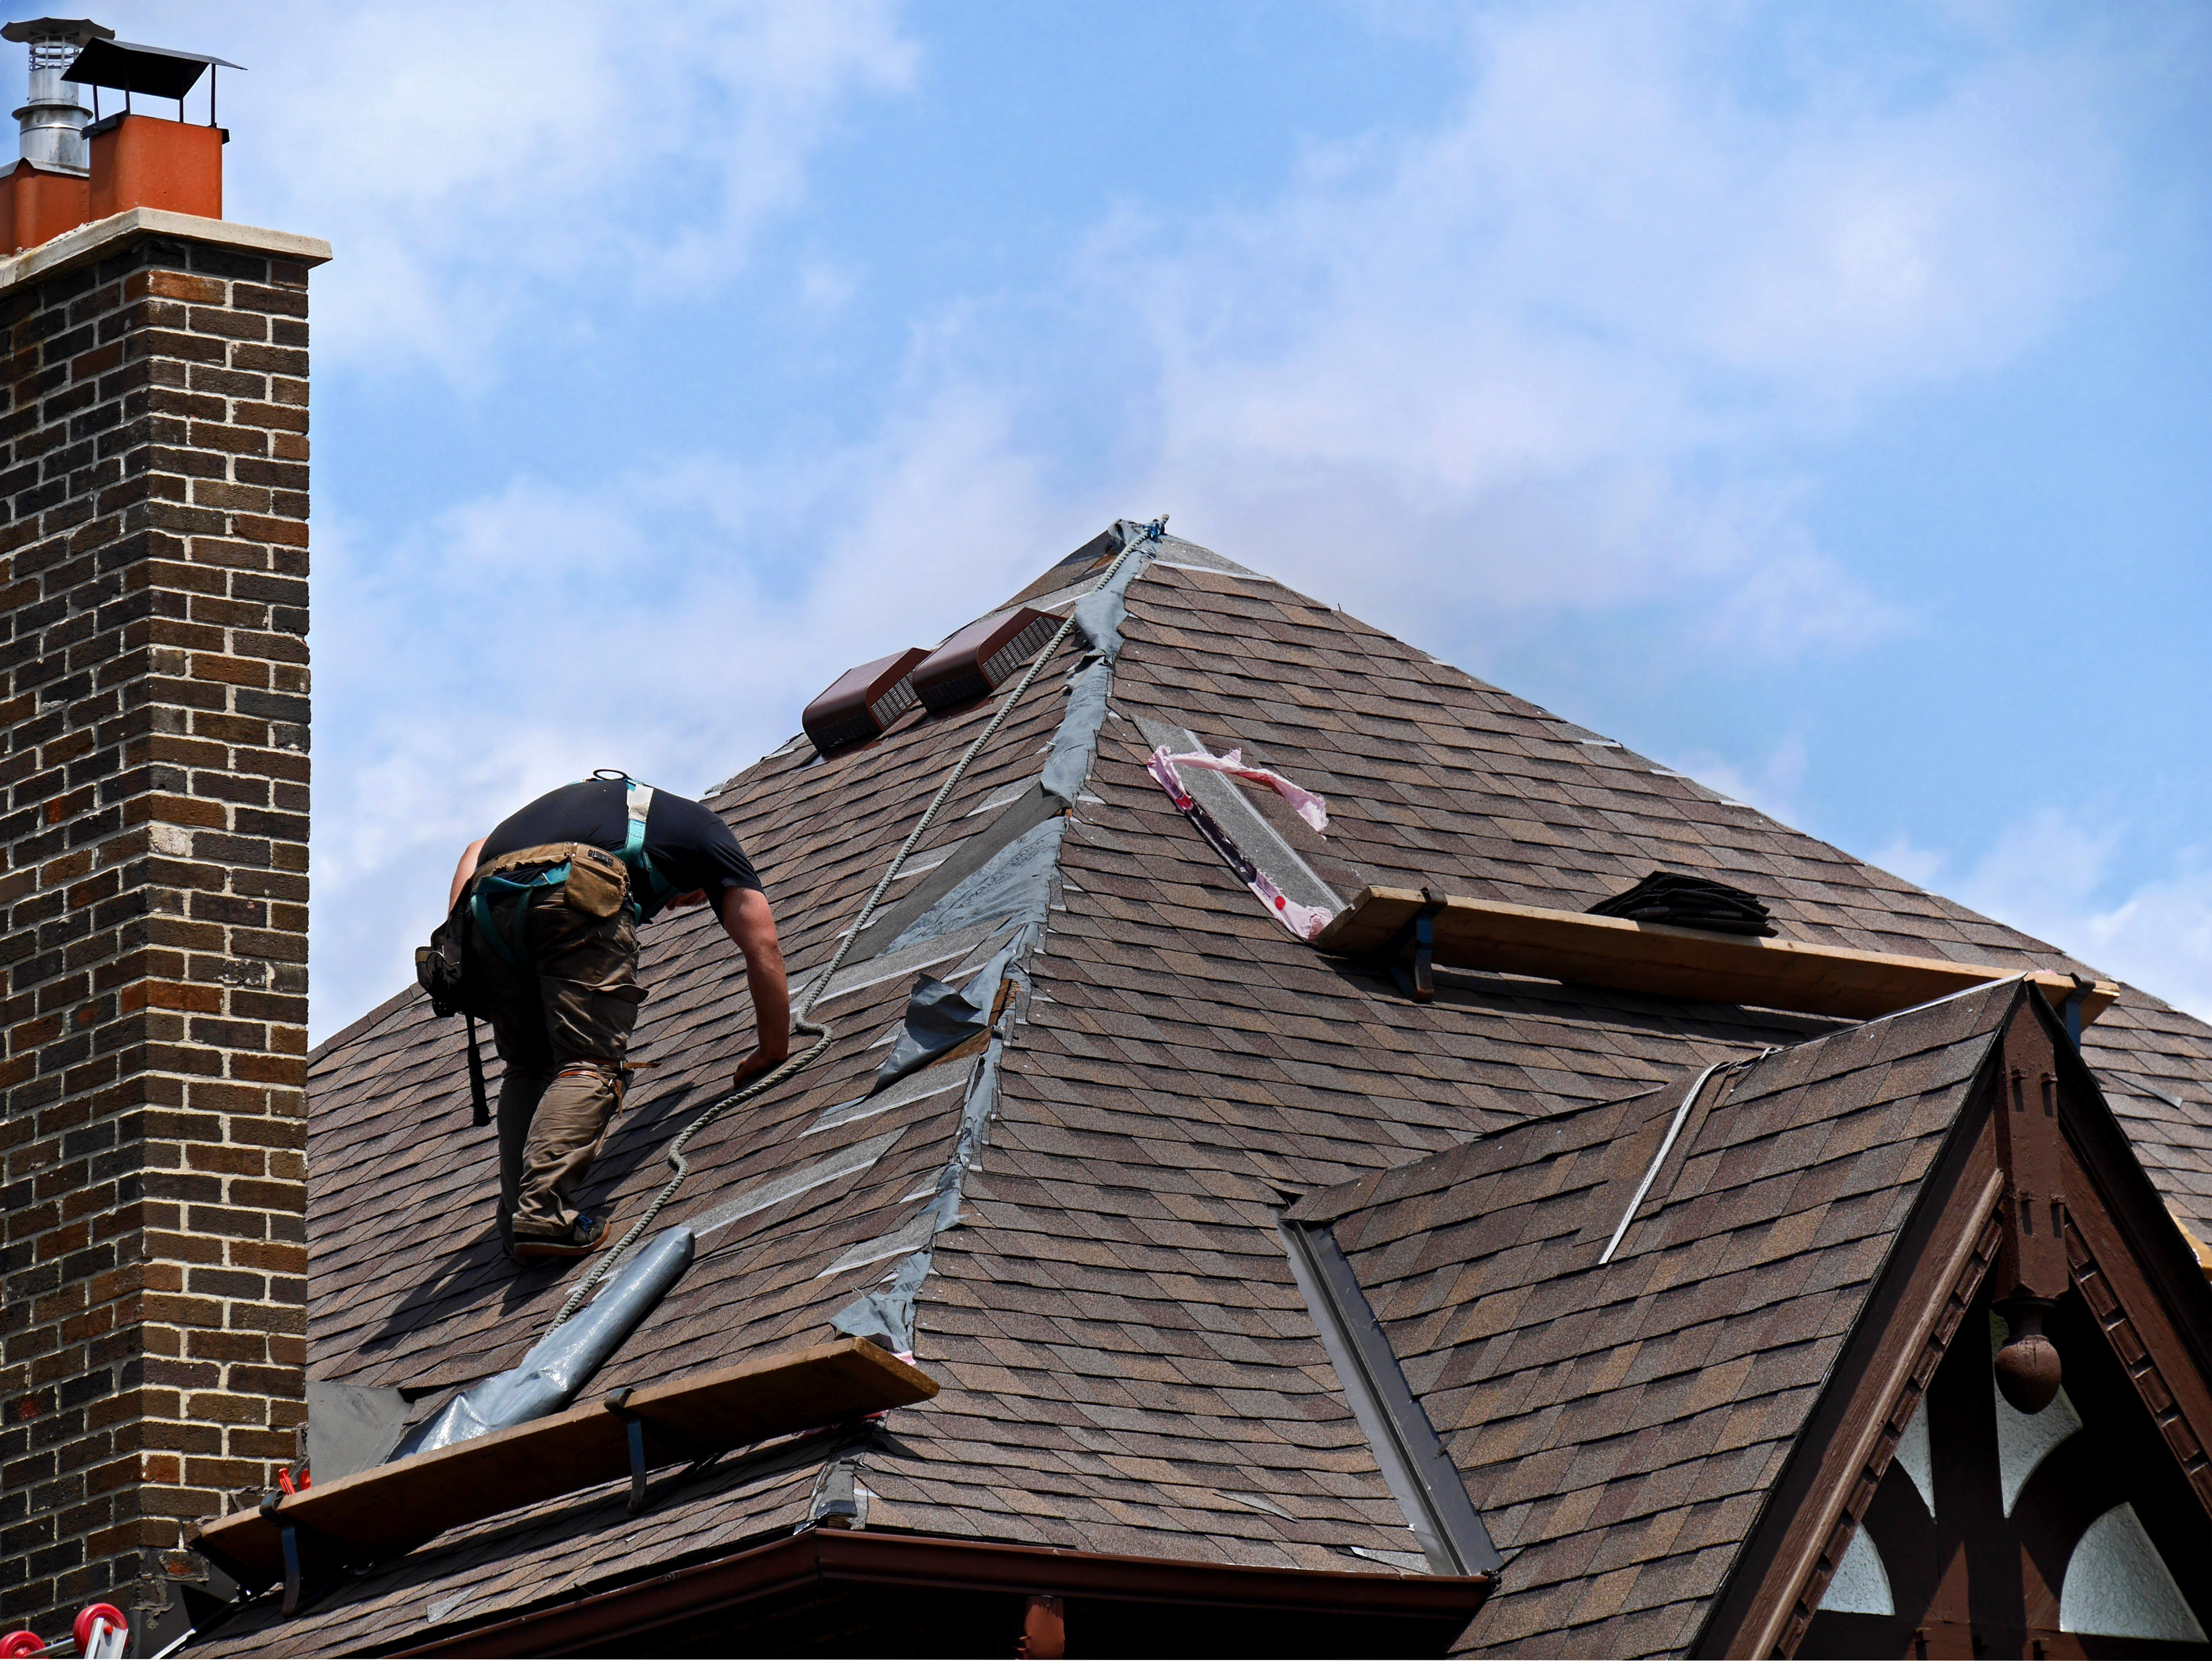 Brixton roofing services